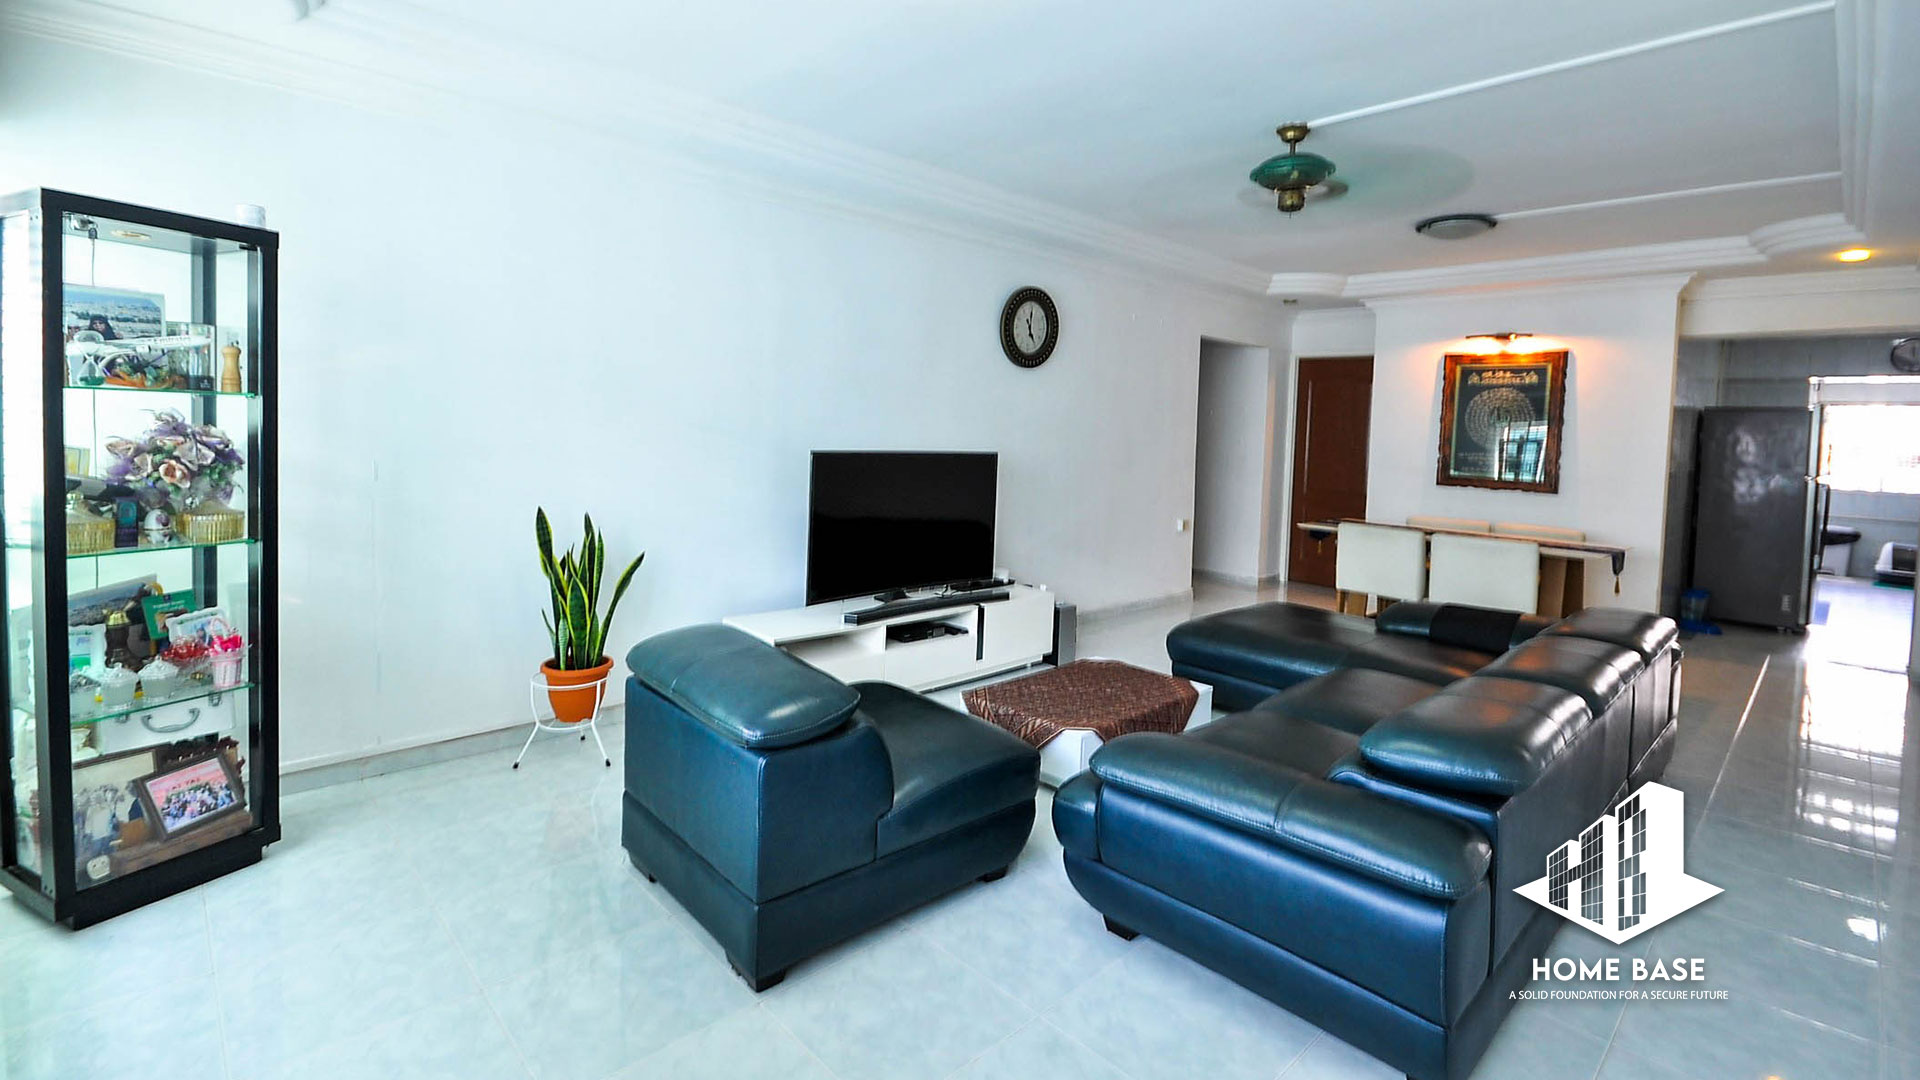 Living Room of 271 Tampines St 21 Img 5